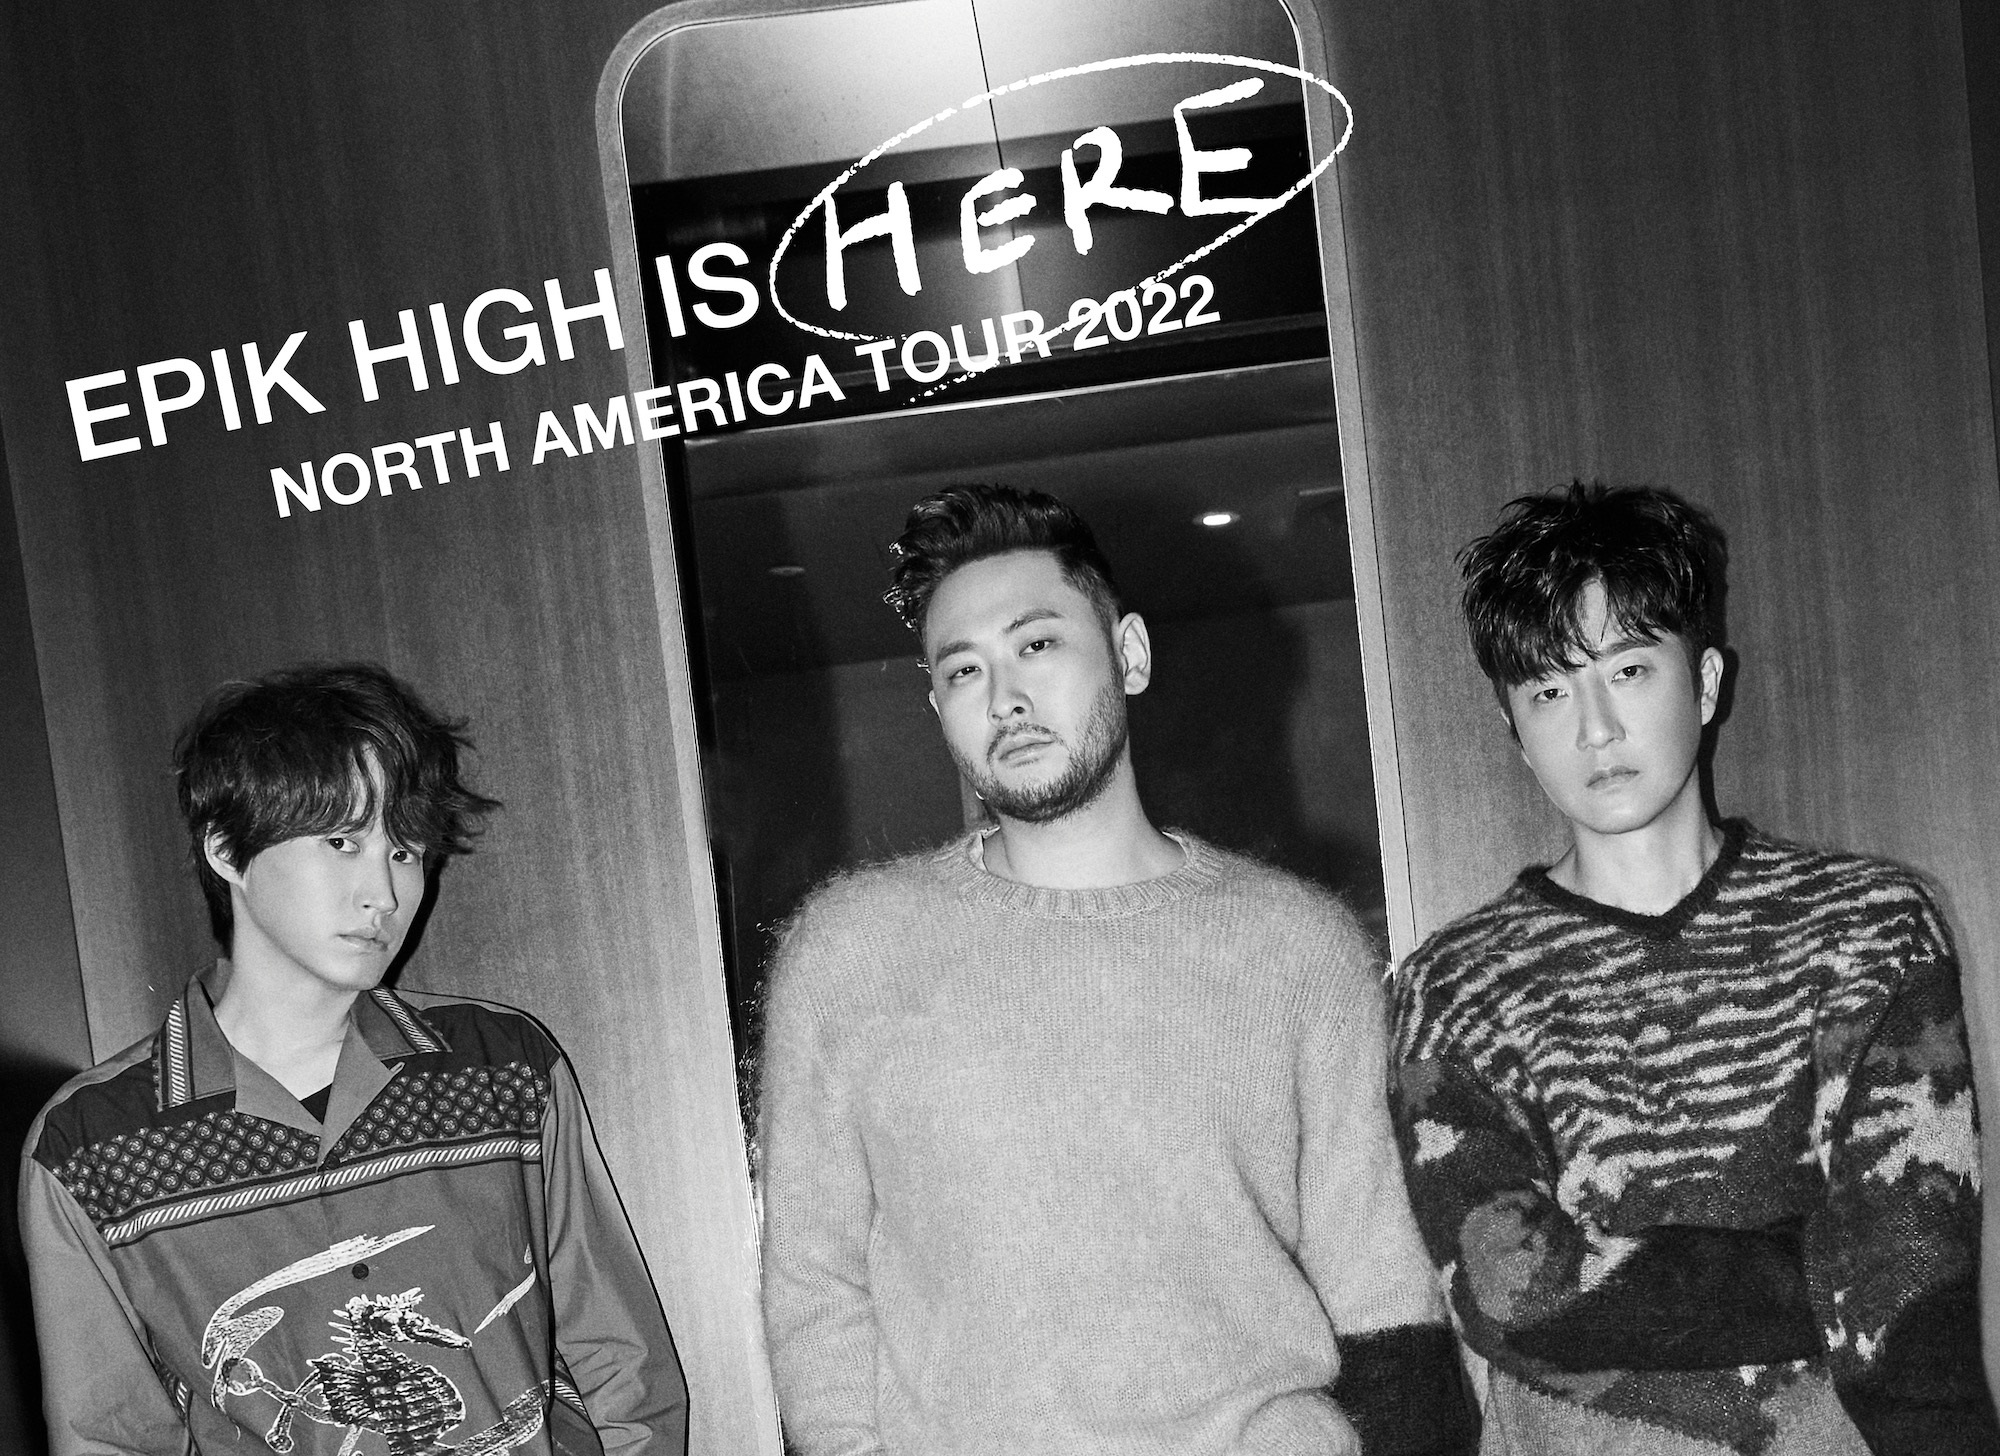 Epik High's epic tour in North America ⋆ The latest kpop news and music